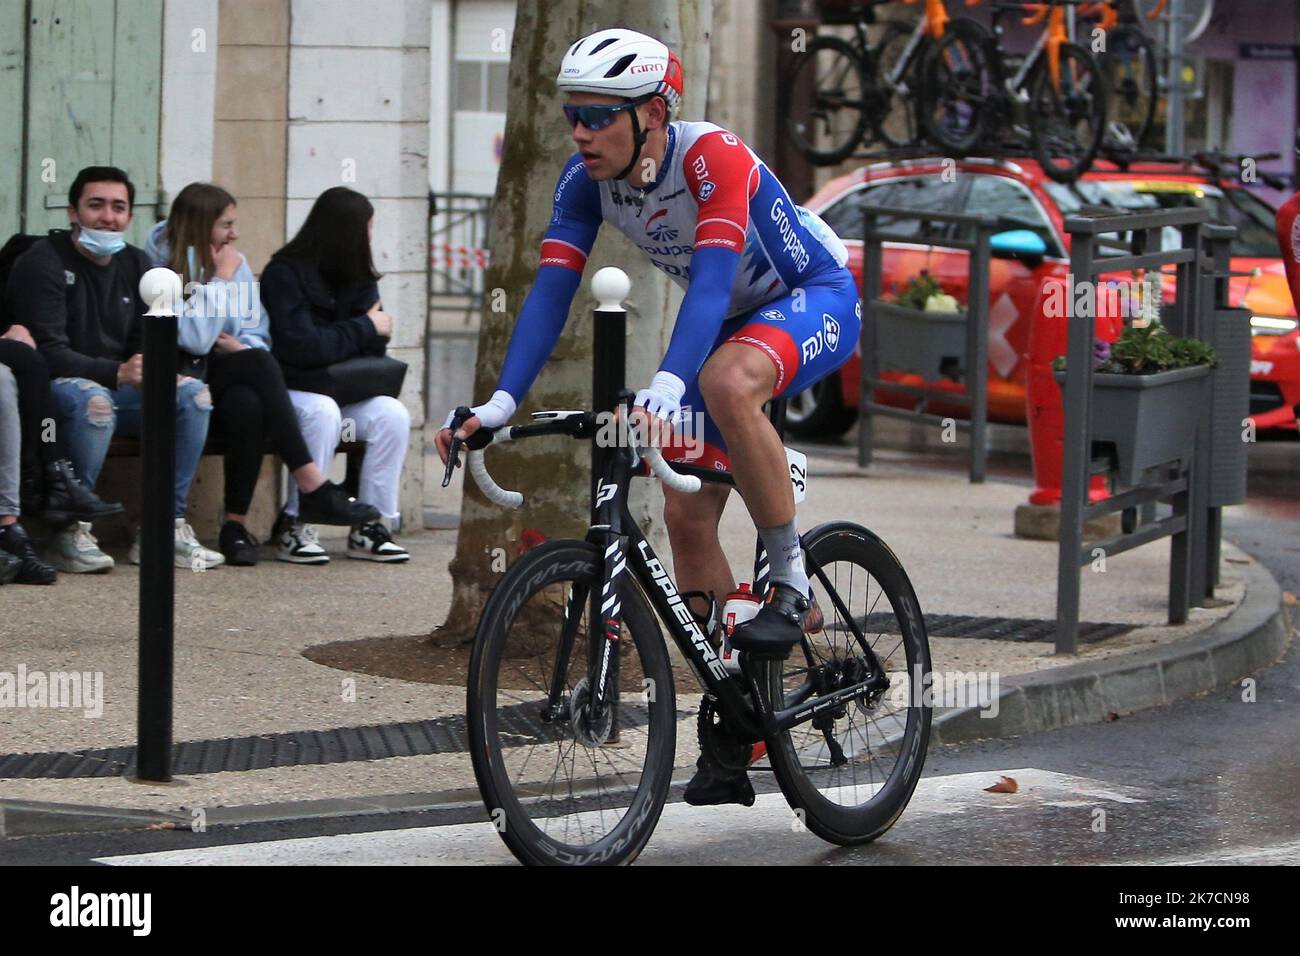 ©Laurent Lairys/MAXPPP - Clement Davy of Groupama - FDJ during the Tour de la Provence, Stage 2, Cassis – Manosque on February 12, 2021 in Manosque, France - Photo Laurent Lairys / MAXPPP Stock Photo